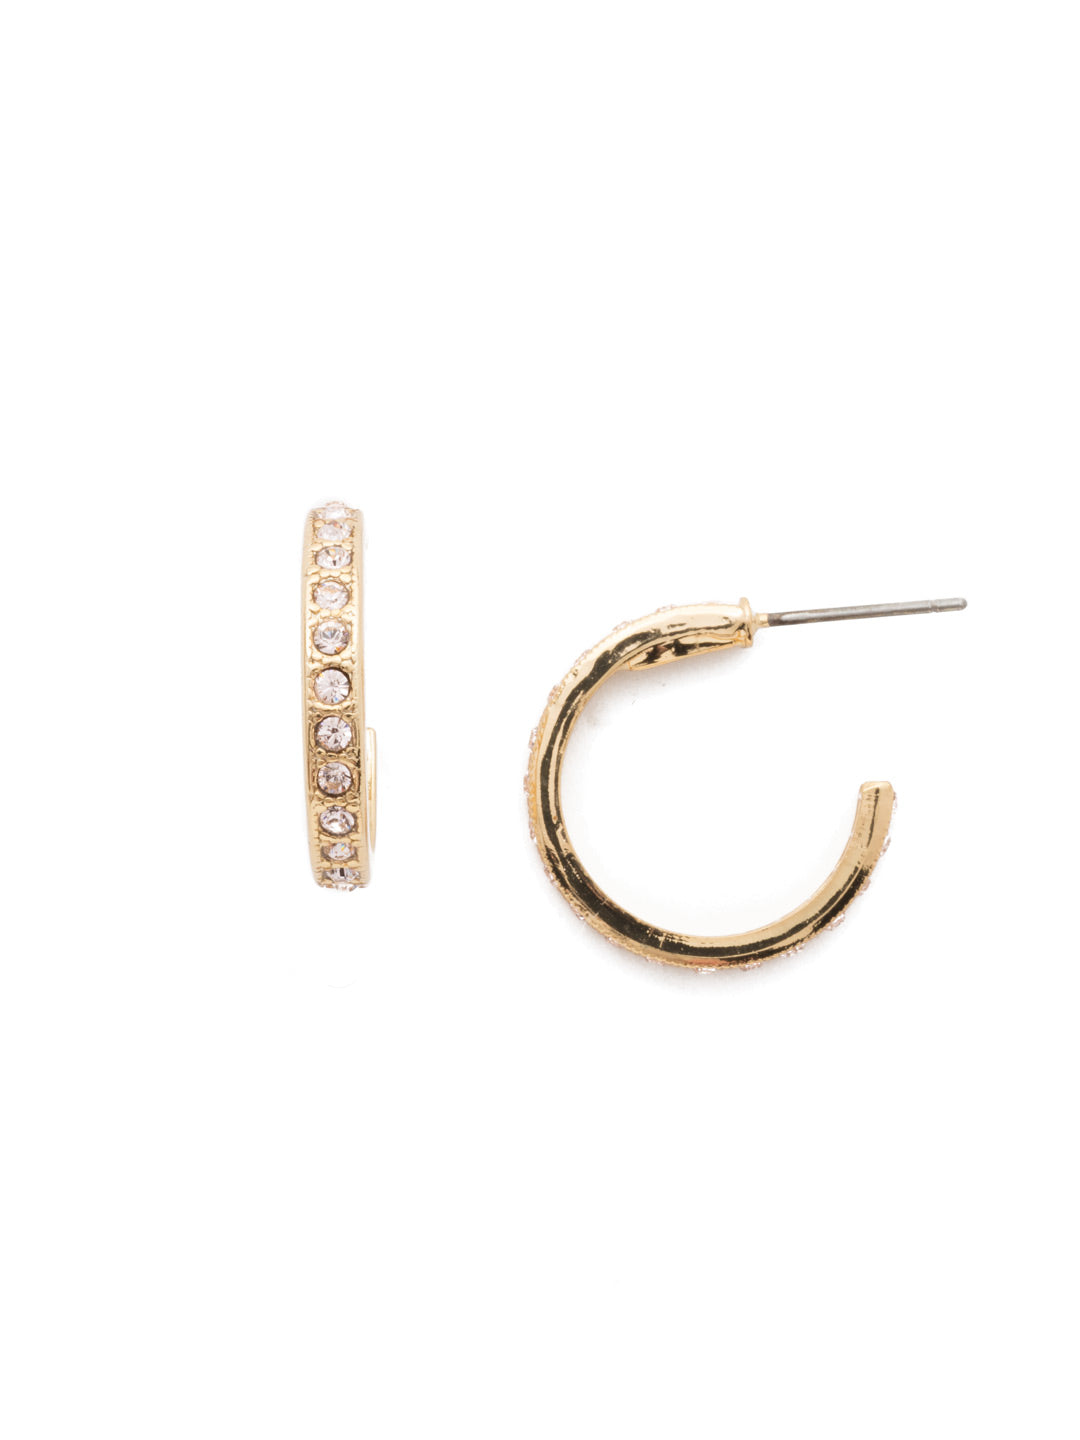 Silva Hoop Earrings - ECR110BGSRC - <p>The perfect hoop with a bit of sparkle. The Silvia Hoop Earrings is perfectly lined with small dainty crystals. From Sorrelli's Scarlet Champagne  collection in our Bright Gold-tone finish.</p>